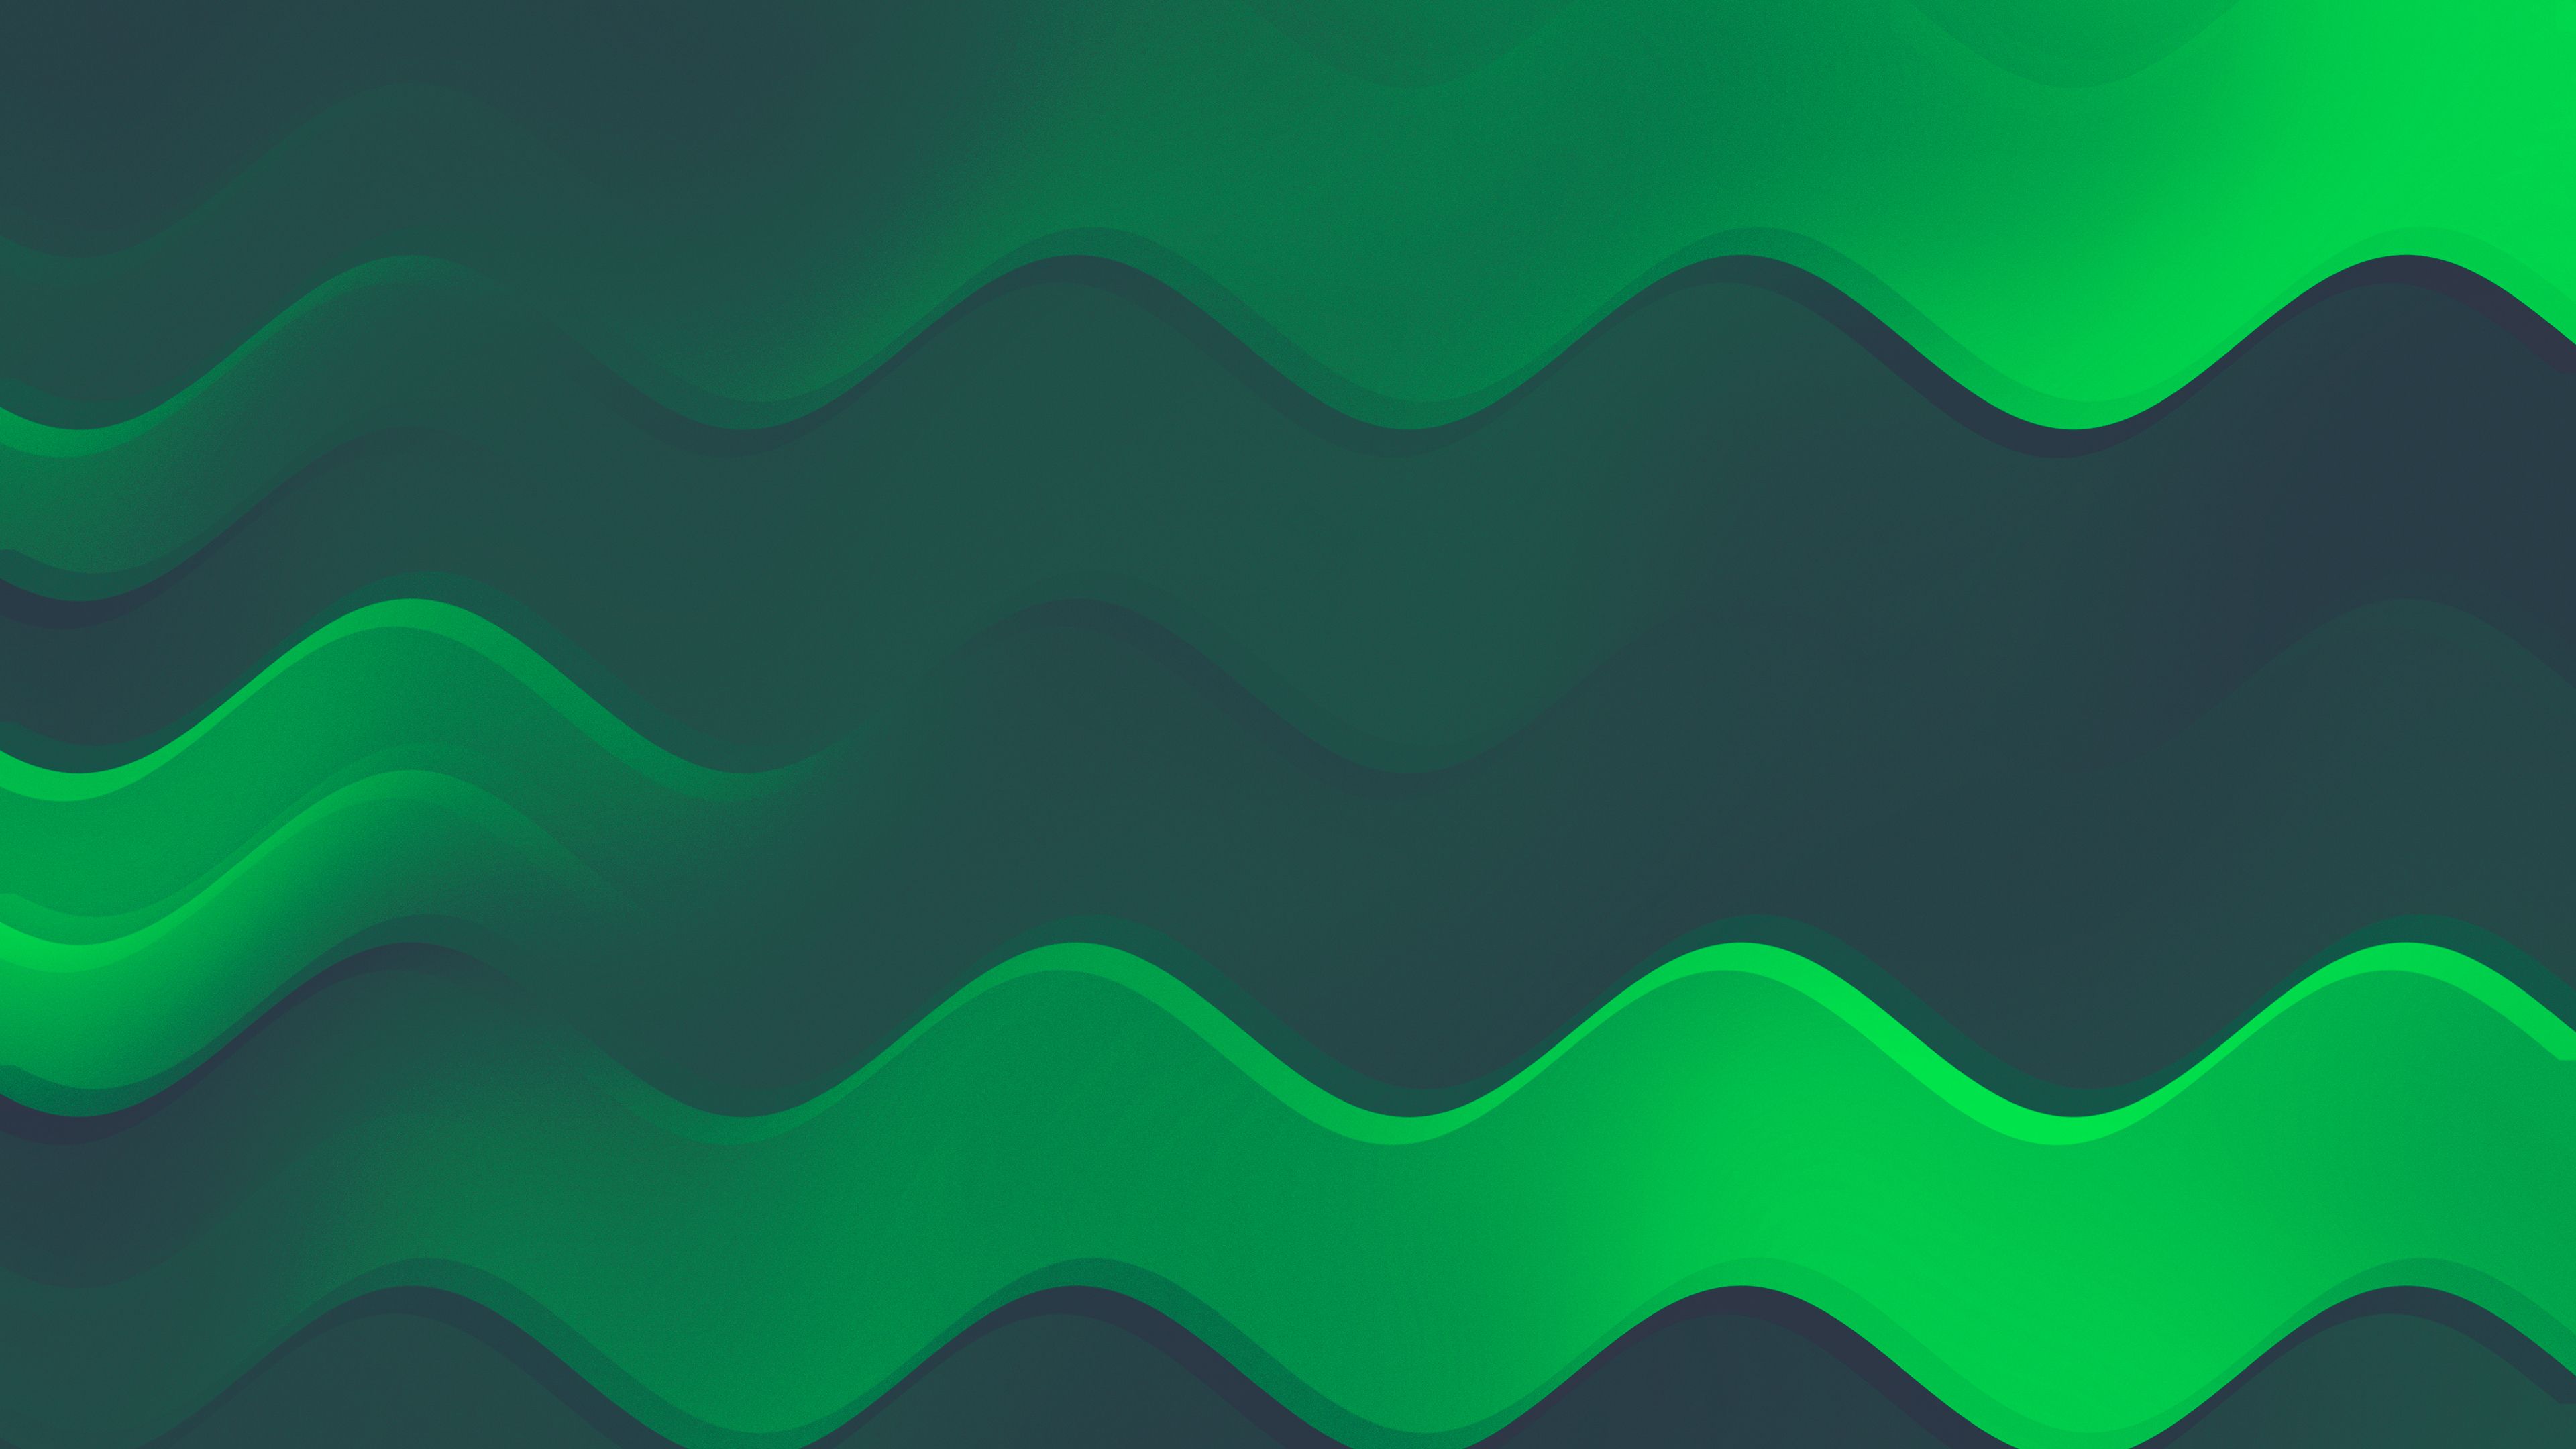 Free Green Waves Chromebook Wallpaper Ready For Download - Illustration - HD Wallpaper 